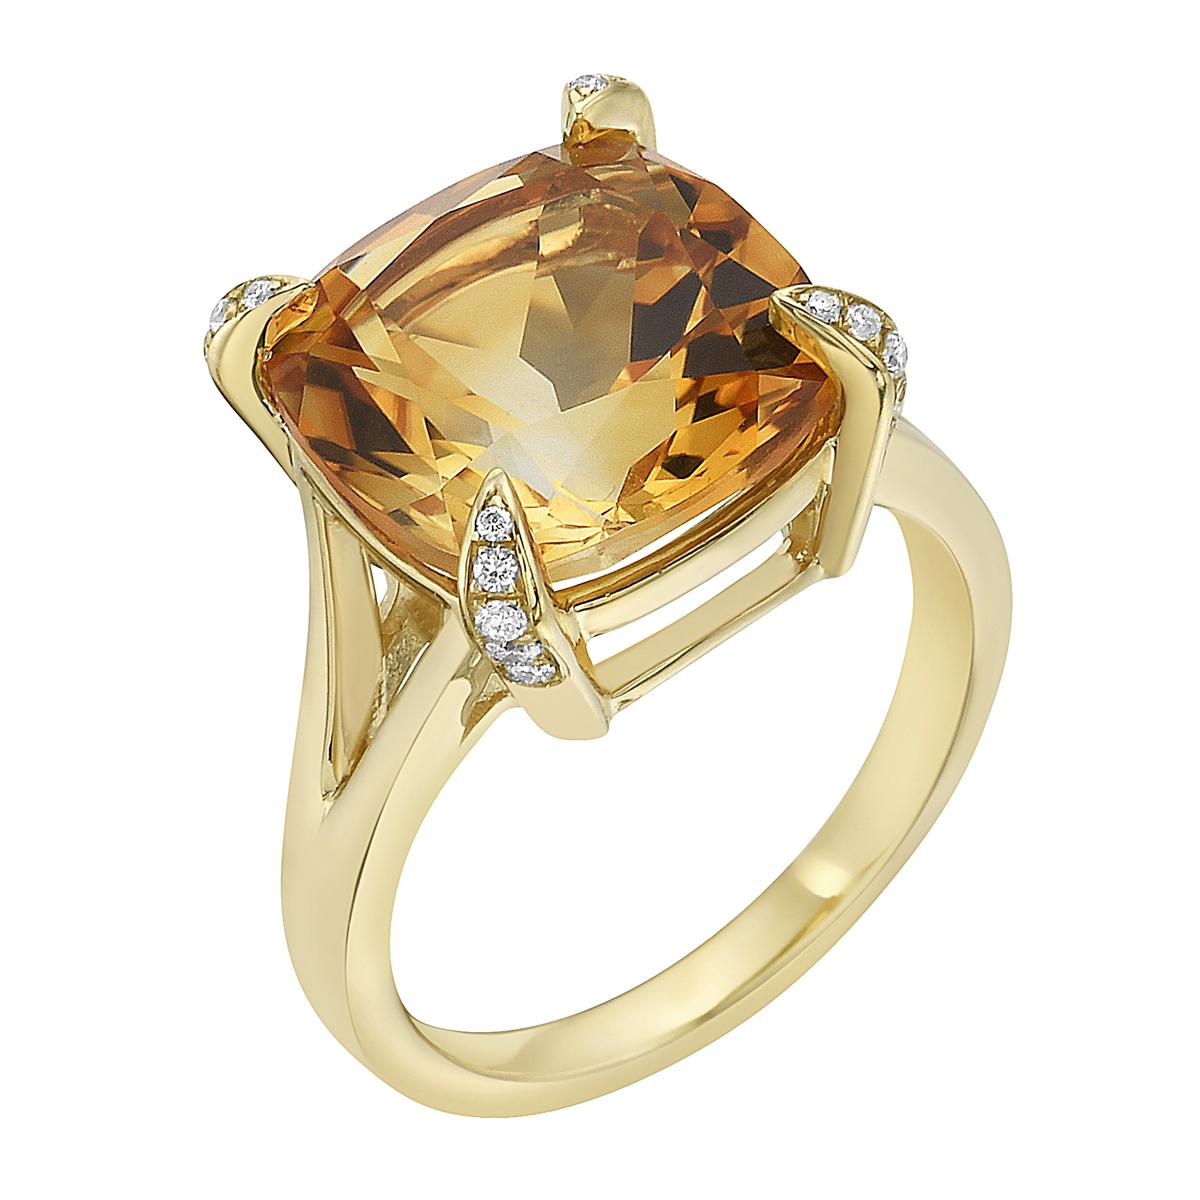 With this exquisite semi-precious yellow gold citrine diamond ring, style and glamour are in the spotlight. This 14-karat cushion cut ring is made from 4.9 grams of gold, 1 citrine totaling 6.24 karats, and is surrounded by 20 round SI1-SI2, GH